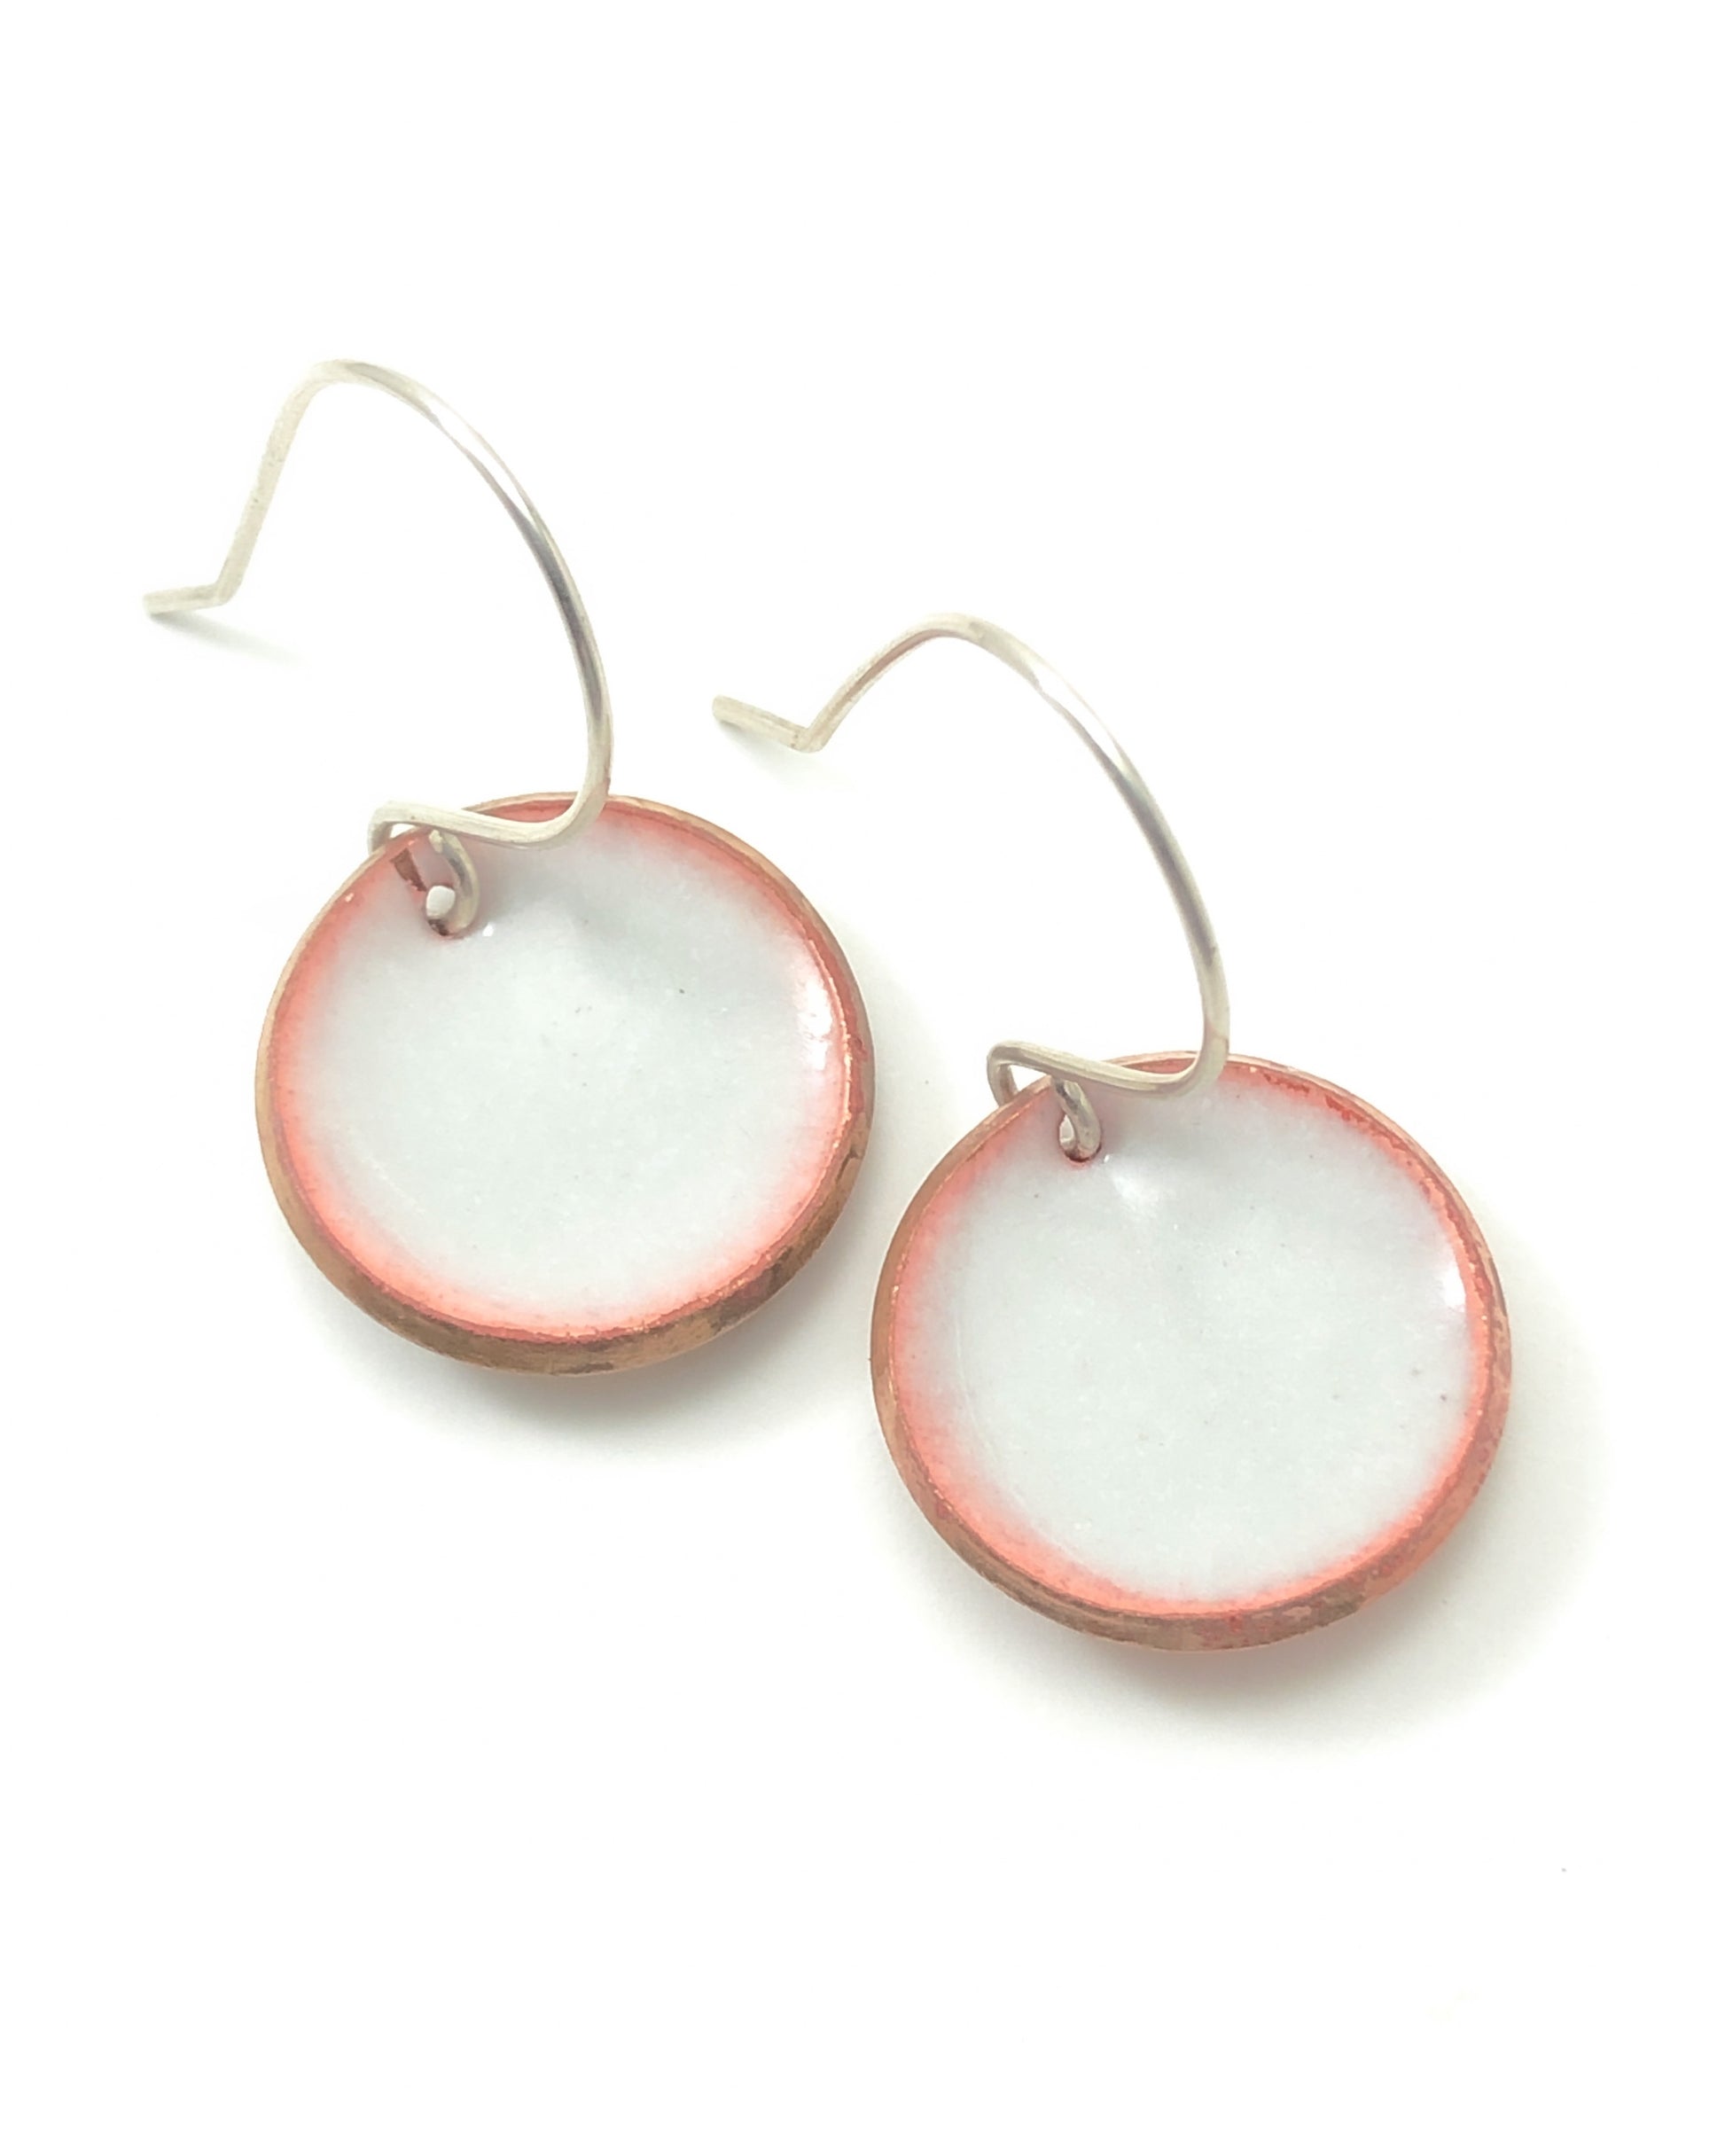 a pair of pink and white earrings on a white background